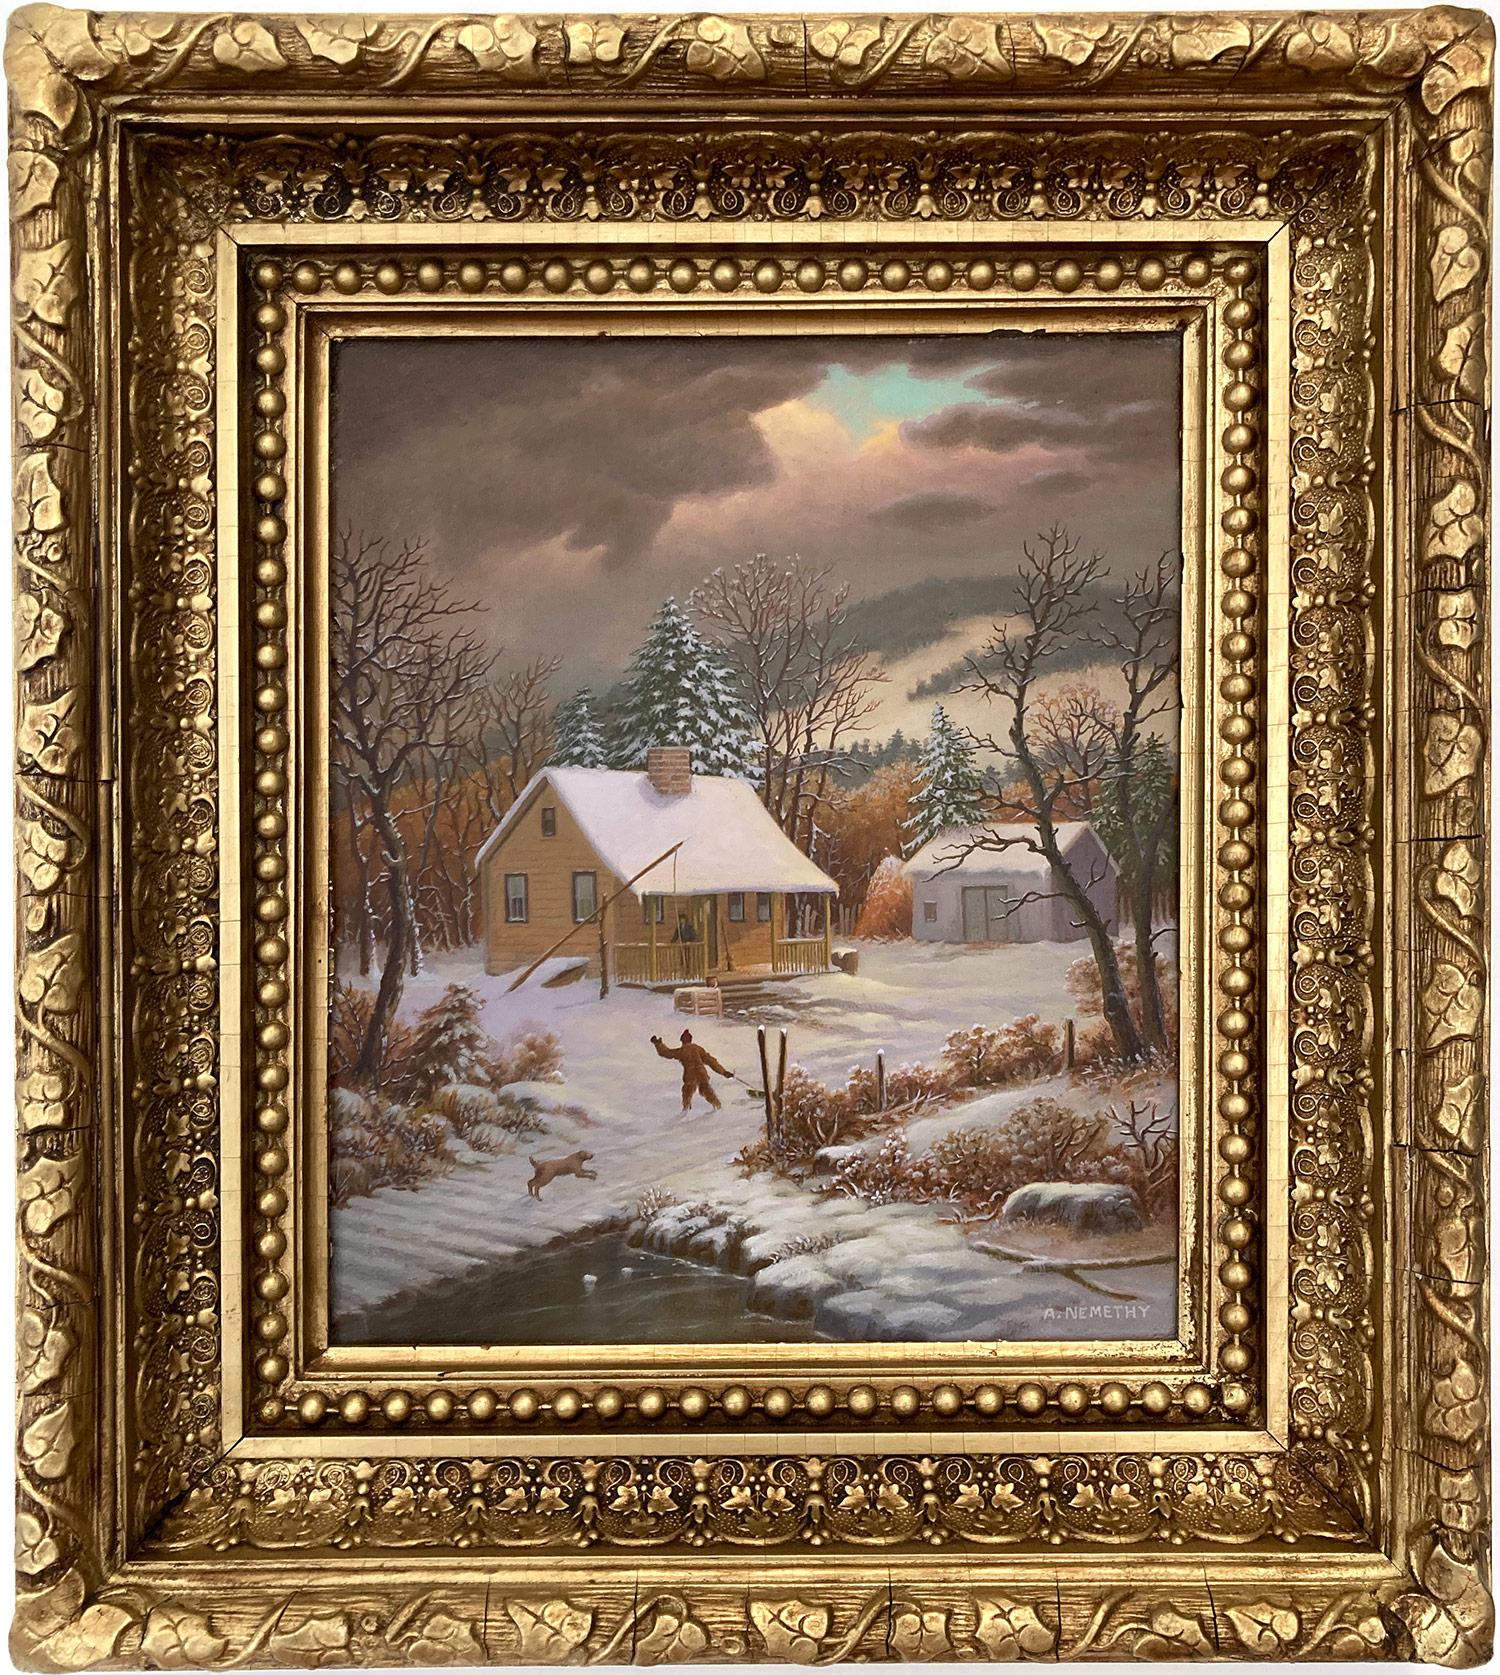 Albert Nemethy Jr. Figurative Painting - "Snow by the Cabin" Impressionistic Winter Snow Scene Oil on Canvas Painting